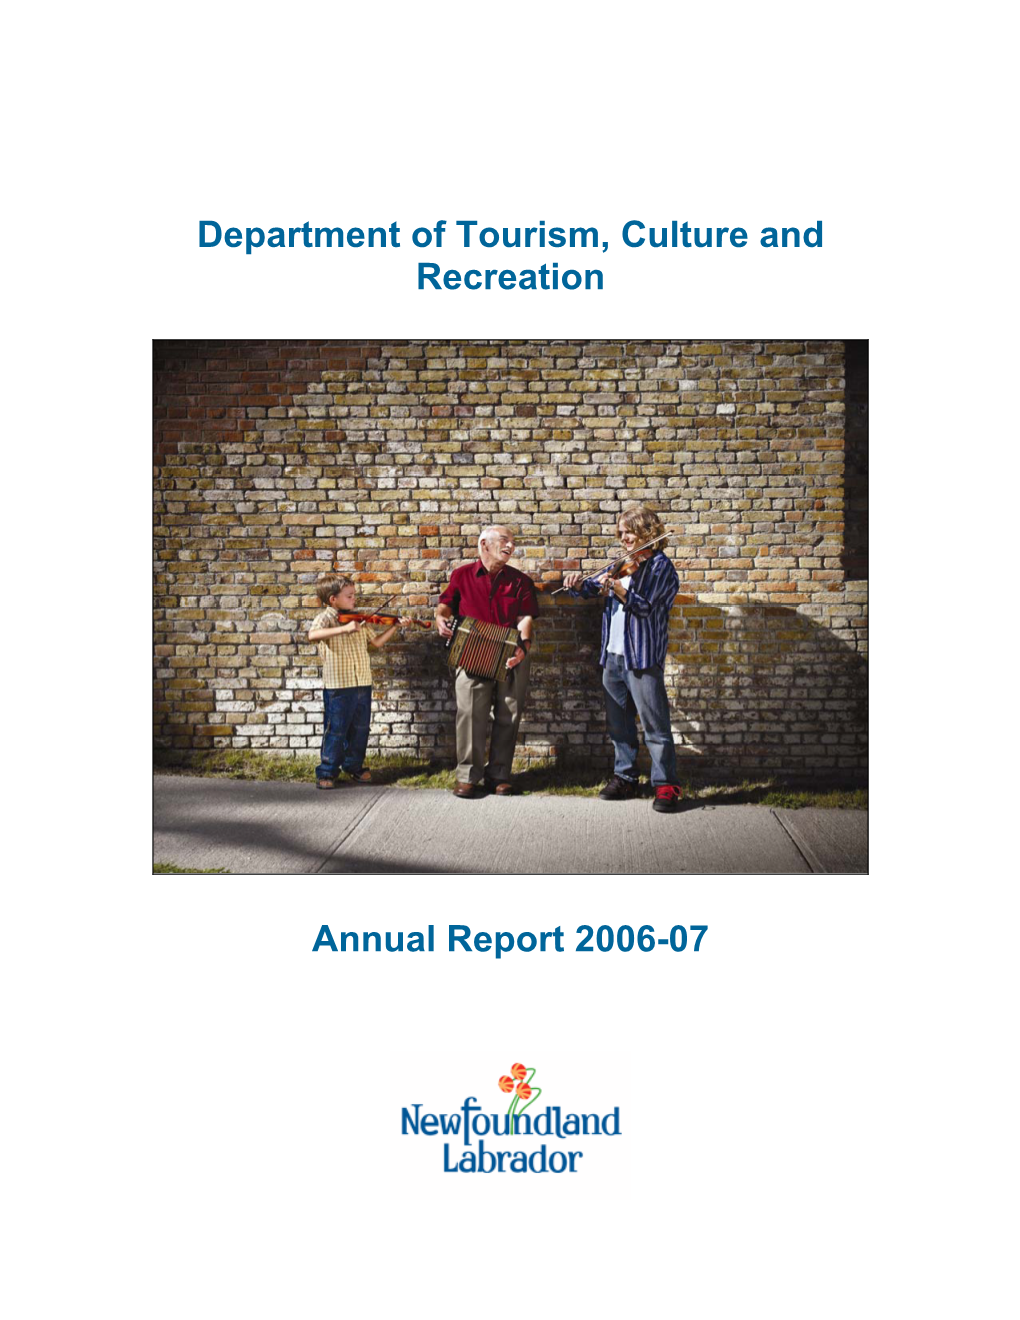 TCR Annual Report 2006-07